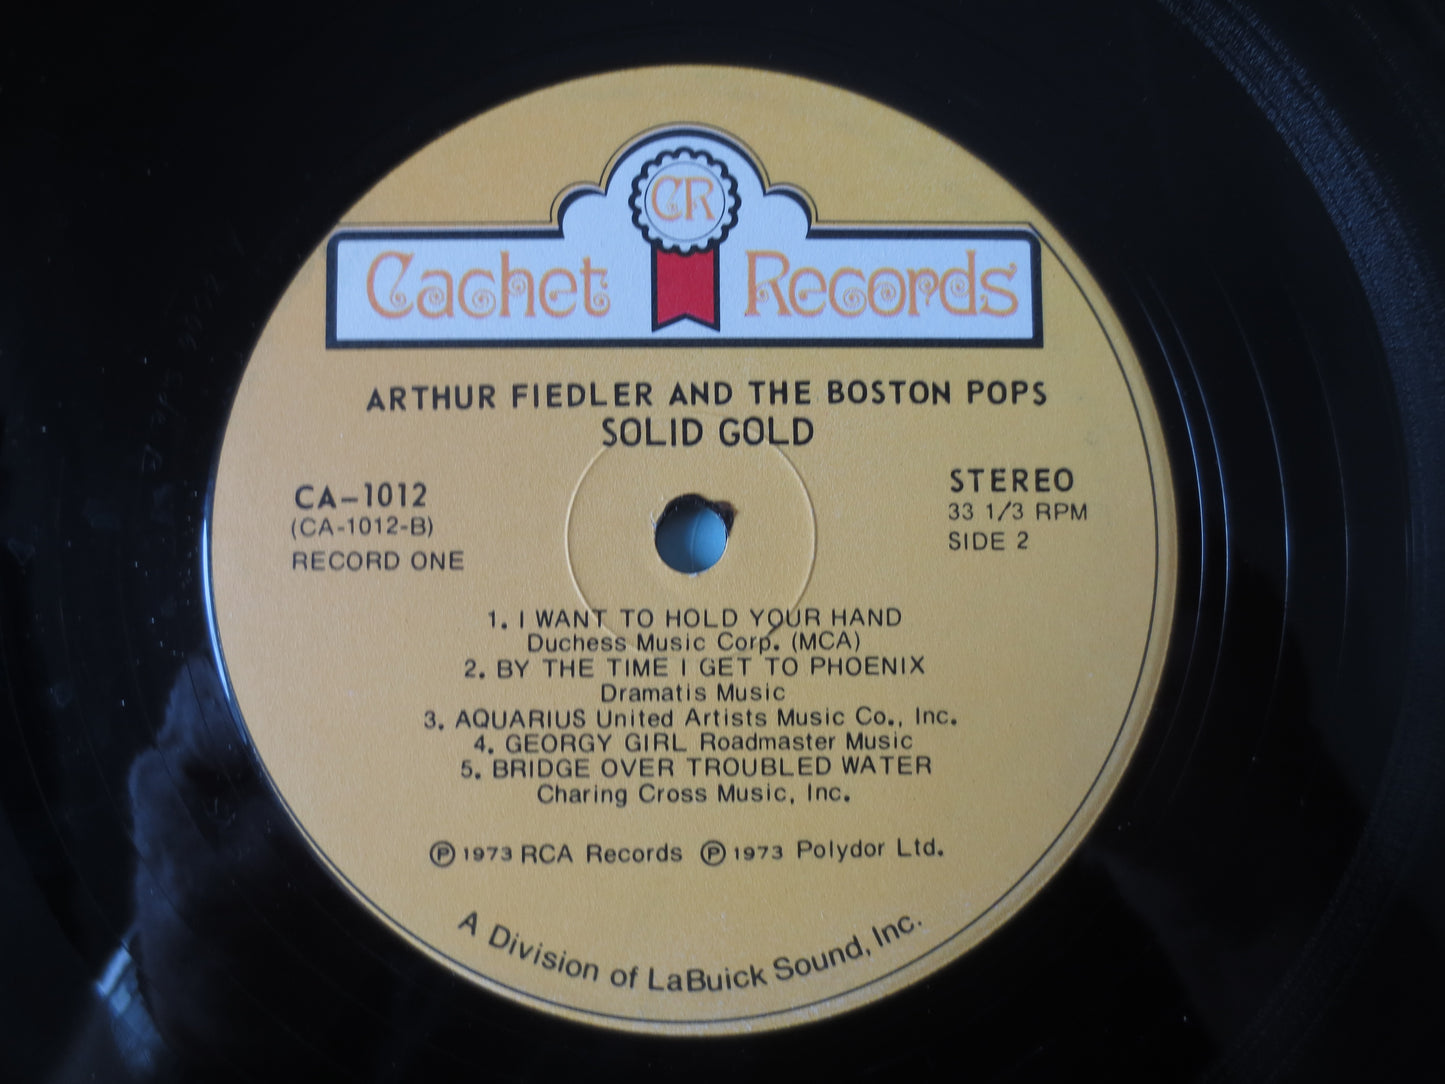 ARTHUR FIEDLER, With the Boston Pops Orchestra, 4 Classical Albums, Jazz Records, Vintage Vinyl, Record Vinyl, 1973 Records